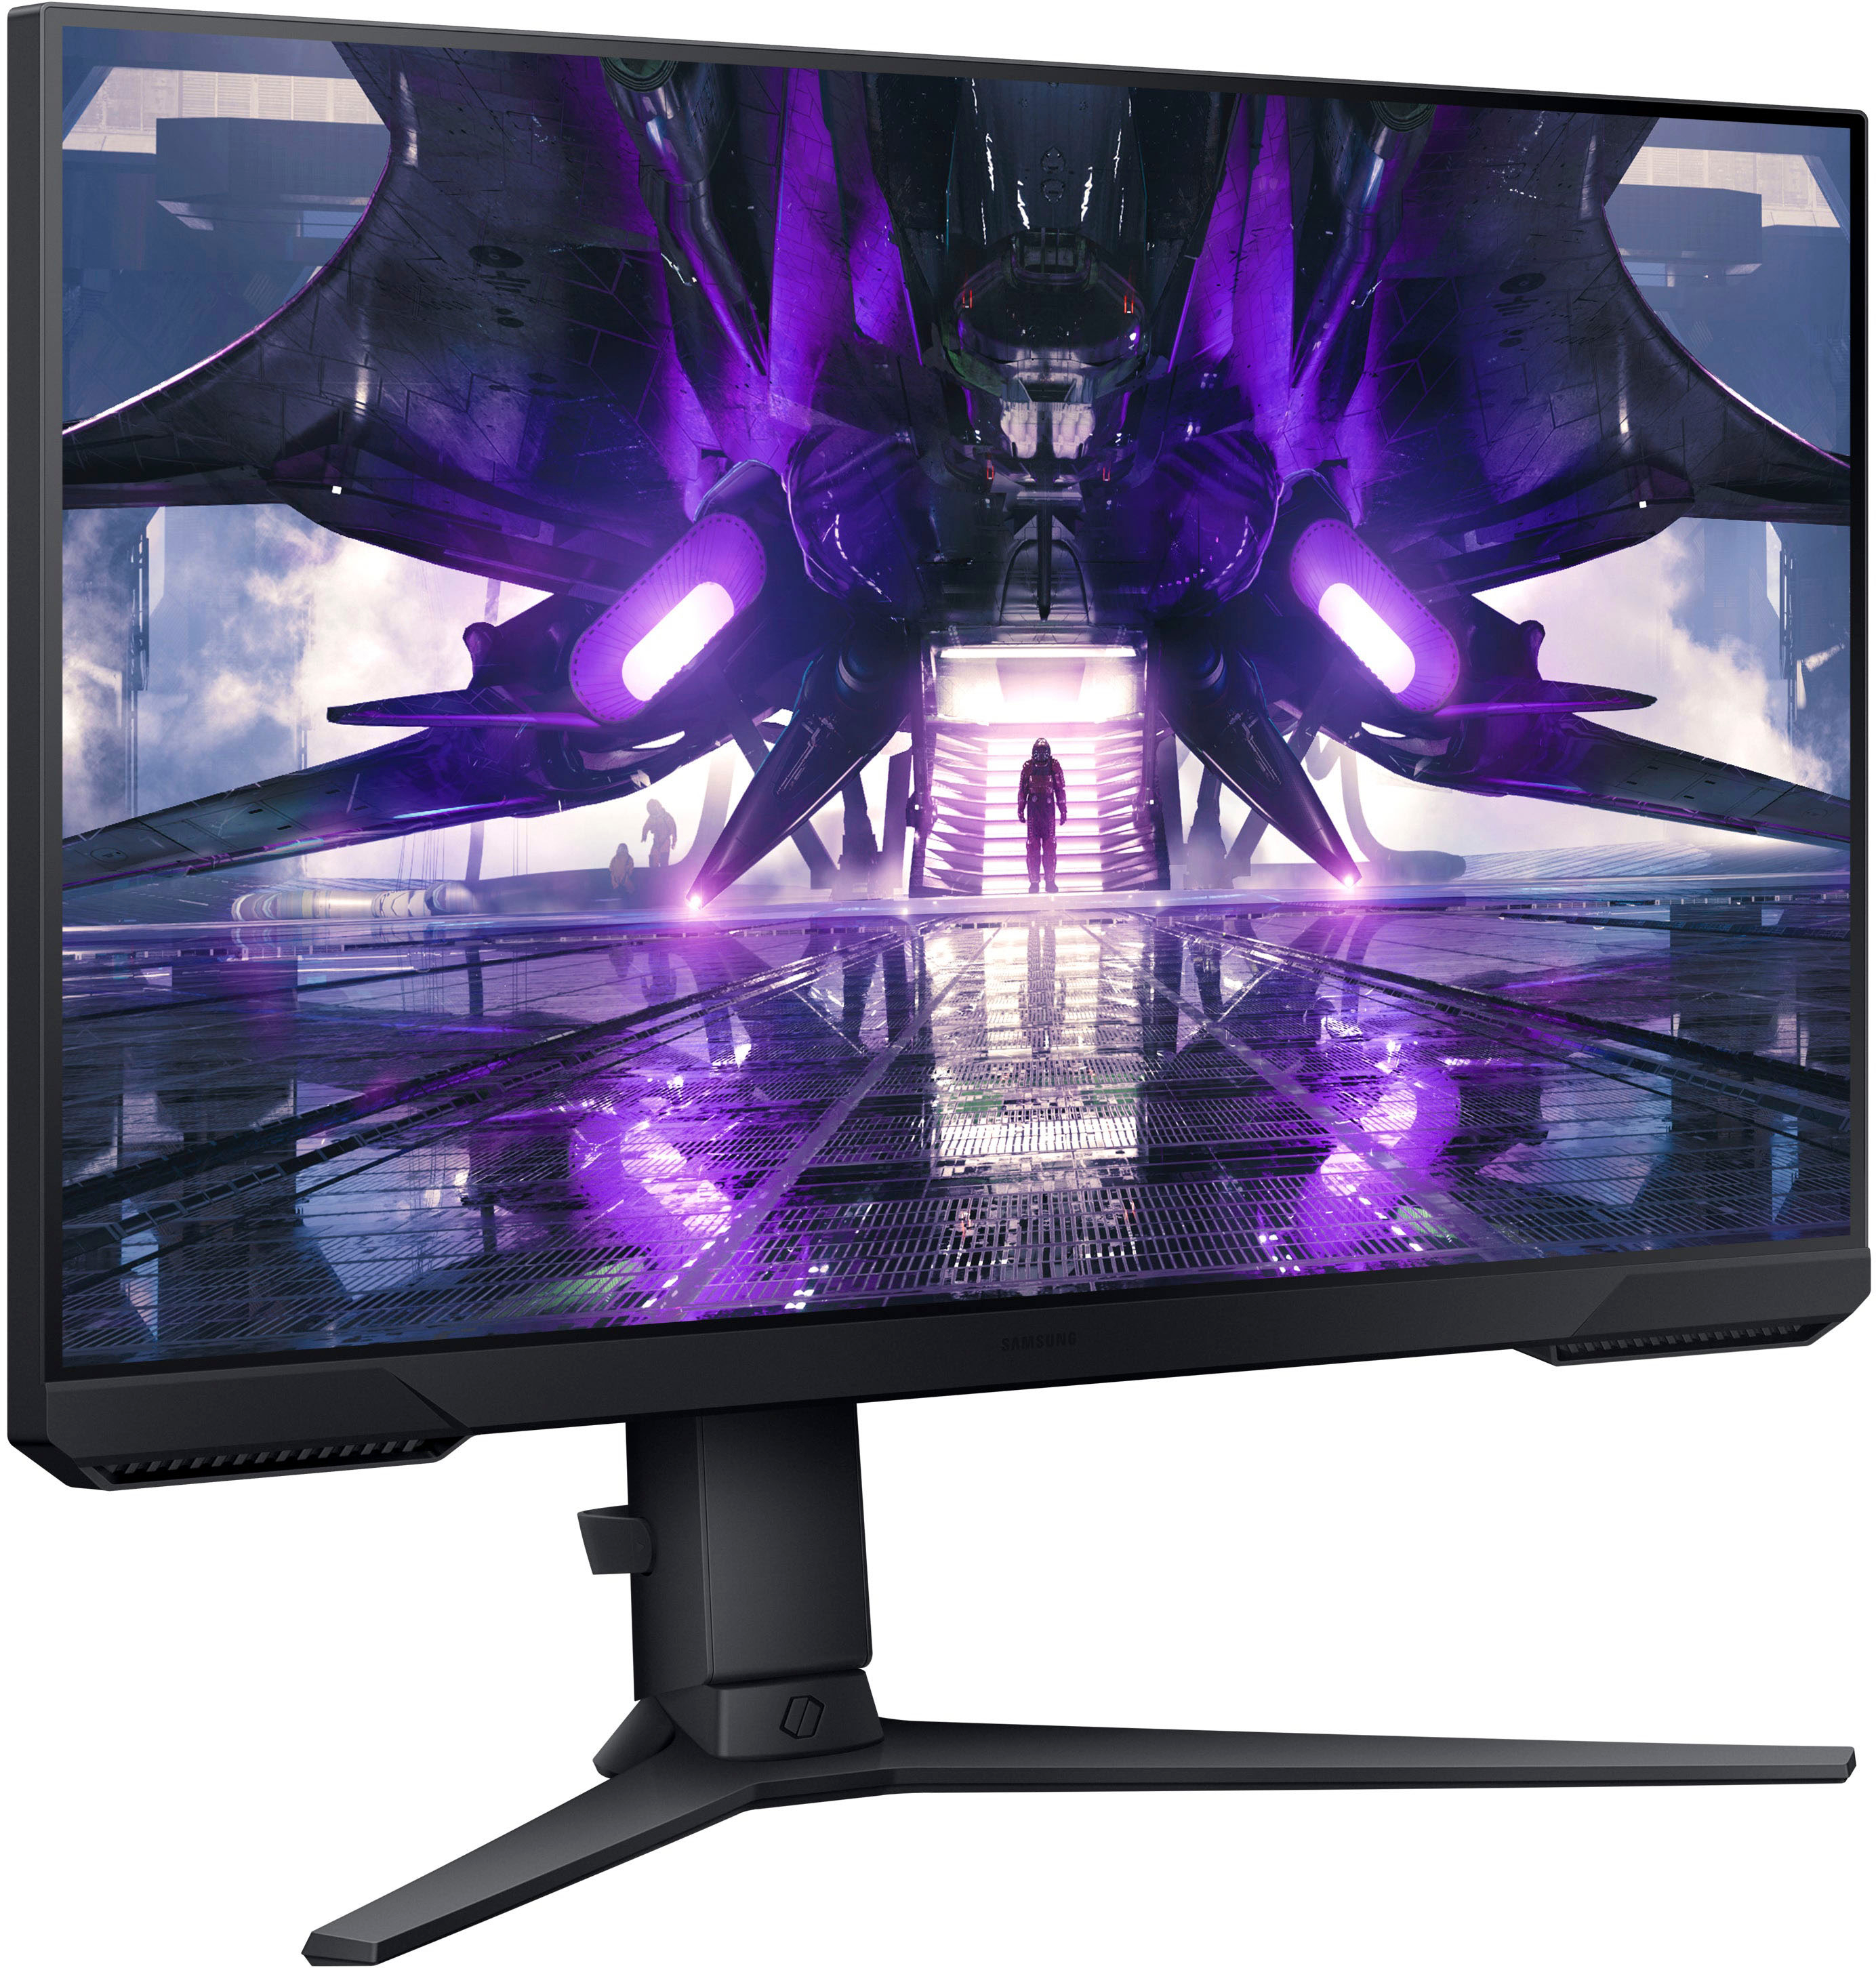 MONITOR LED 27 SAMSUNG LS27AG320NLXPE 1920x1080 HDMI DP 1MS/165Hz